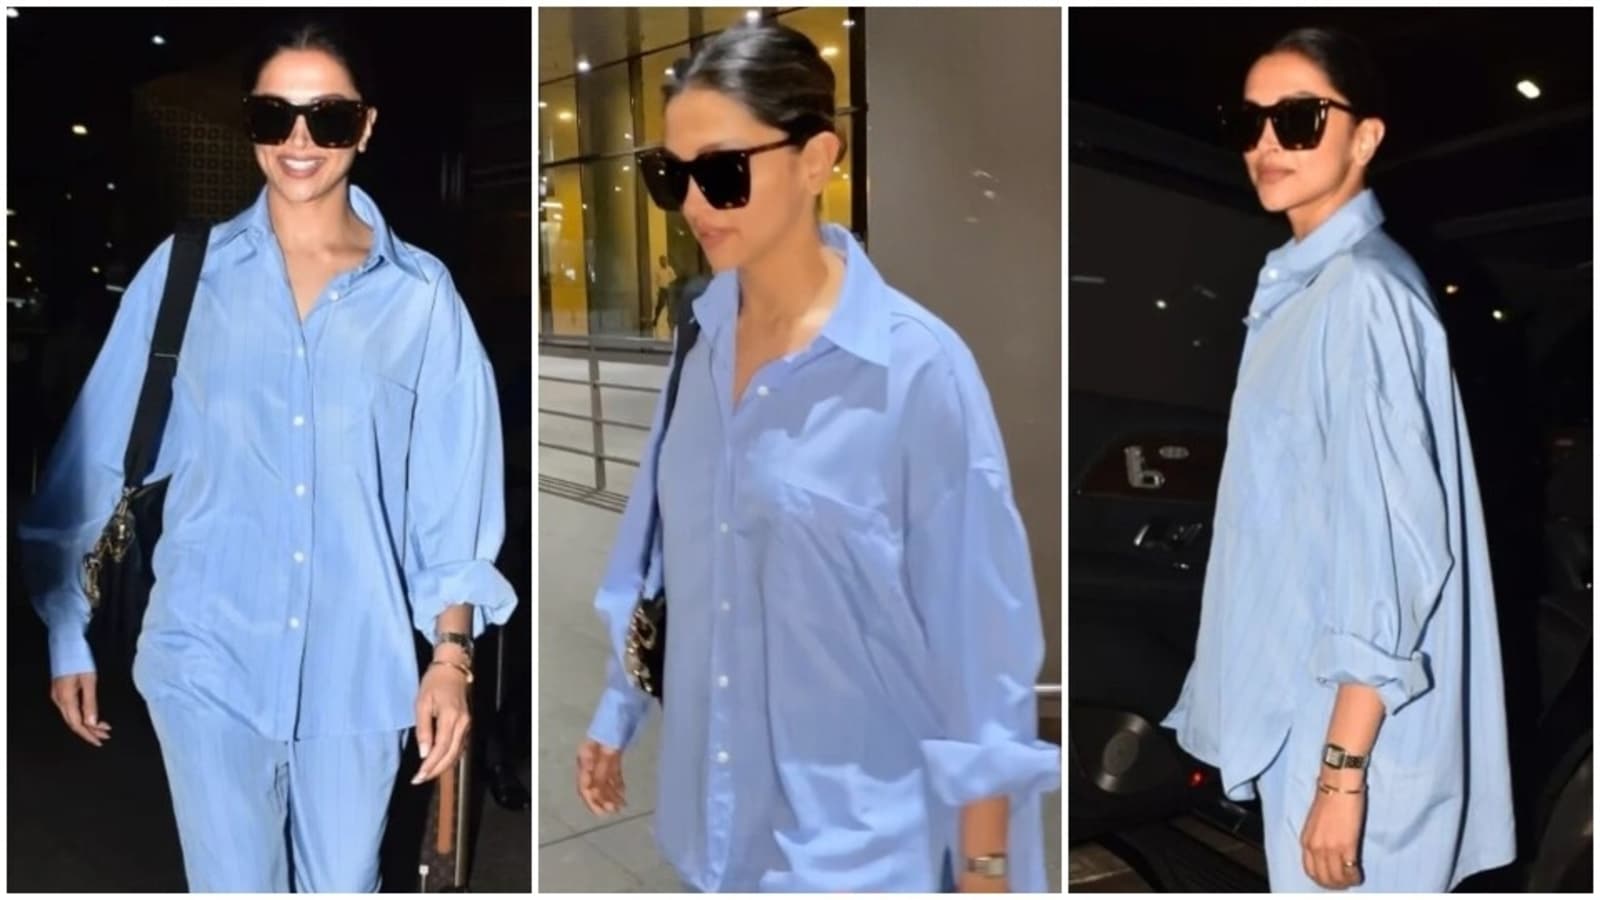 Deepika Padukone brings her A-game with comfy airport fashion in a chic oversized shirt and pants. Watch